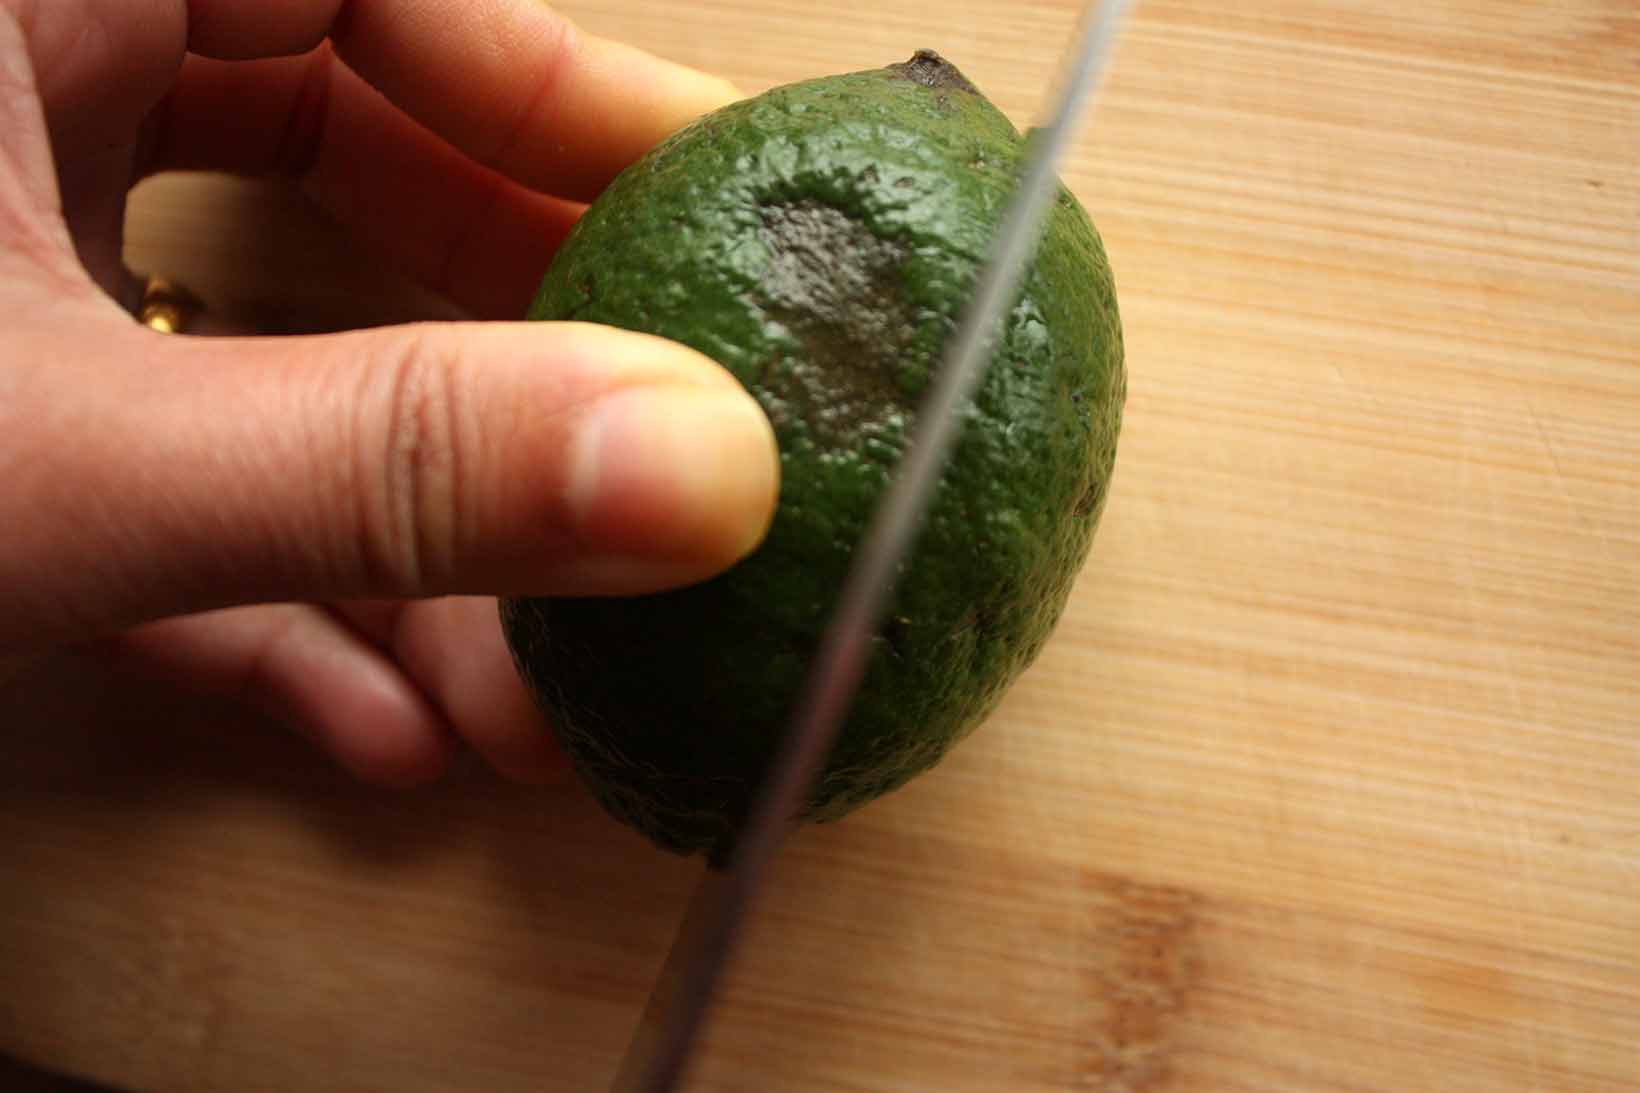 Cut the lime vertically but not right along the core